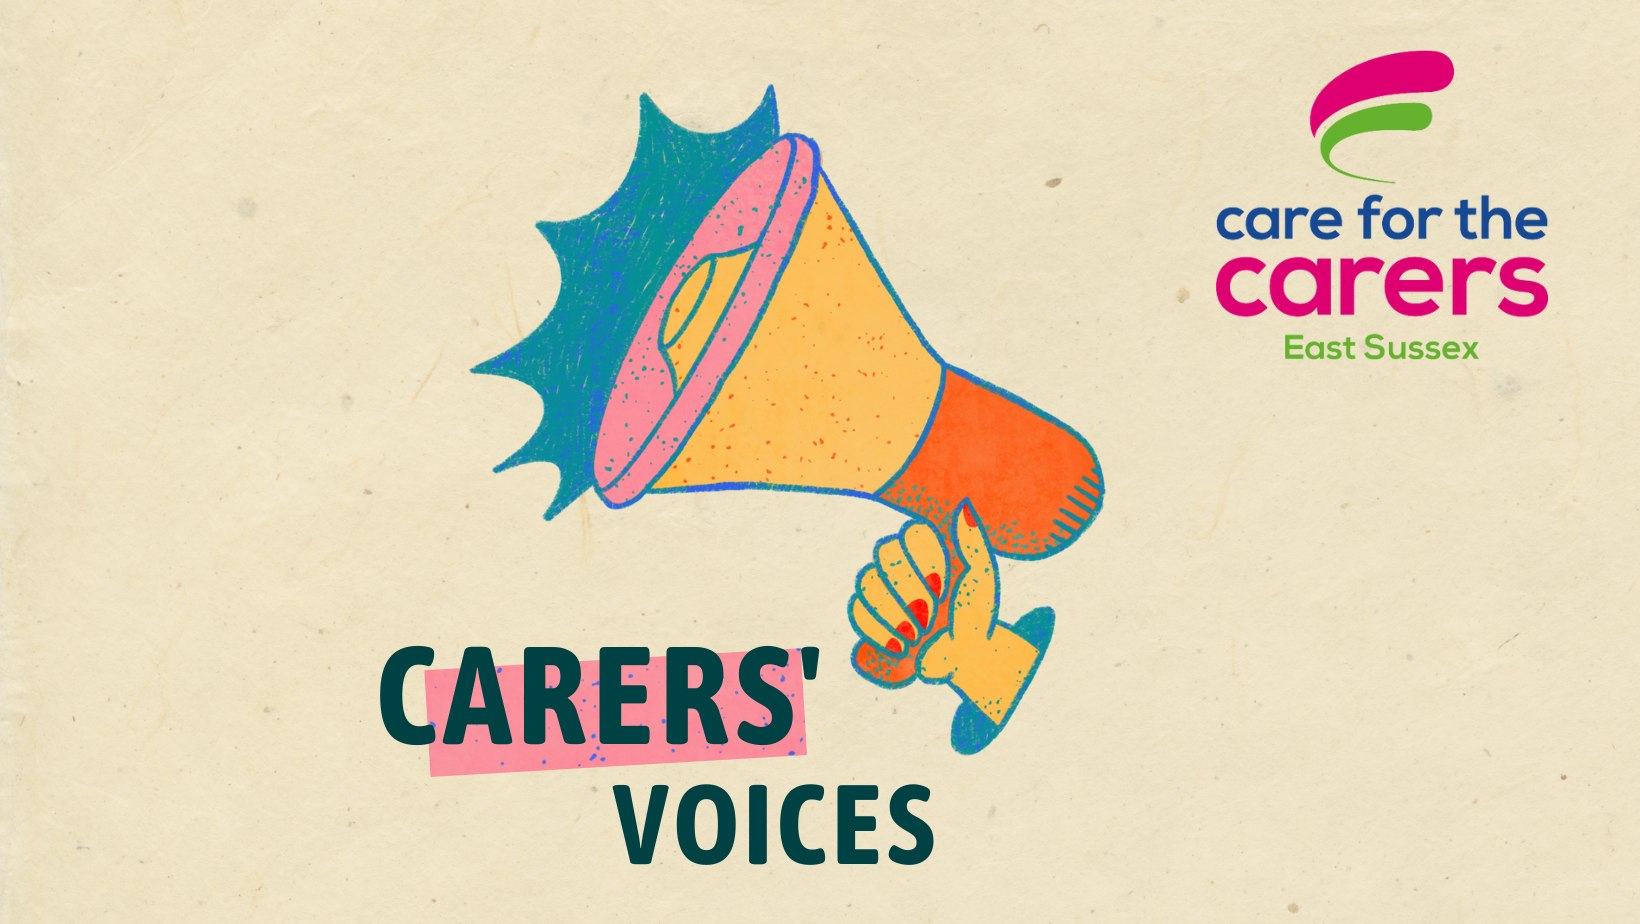 A hand holding a yellow and orange megaphone. Underneath it are the words 'Carers' Voices'. The Care for the Carers logo is in the top right corner.